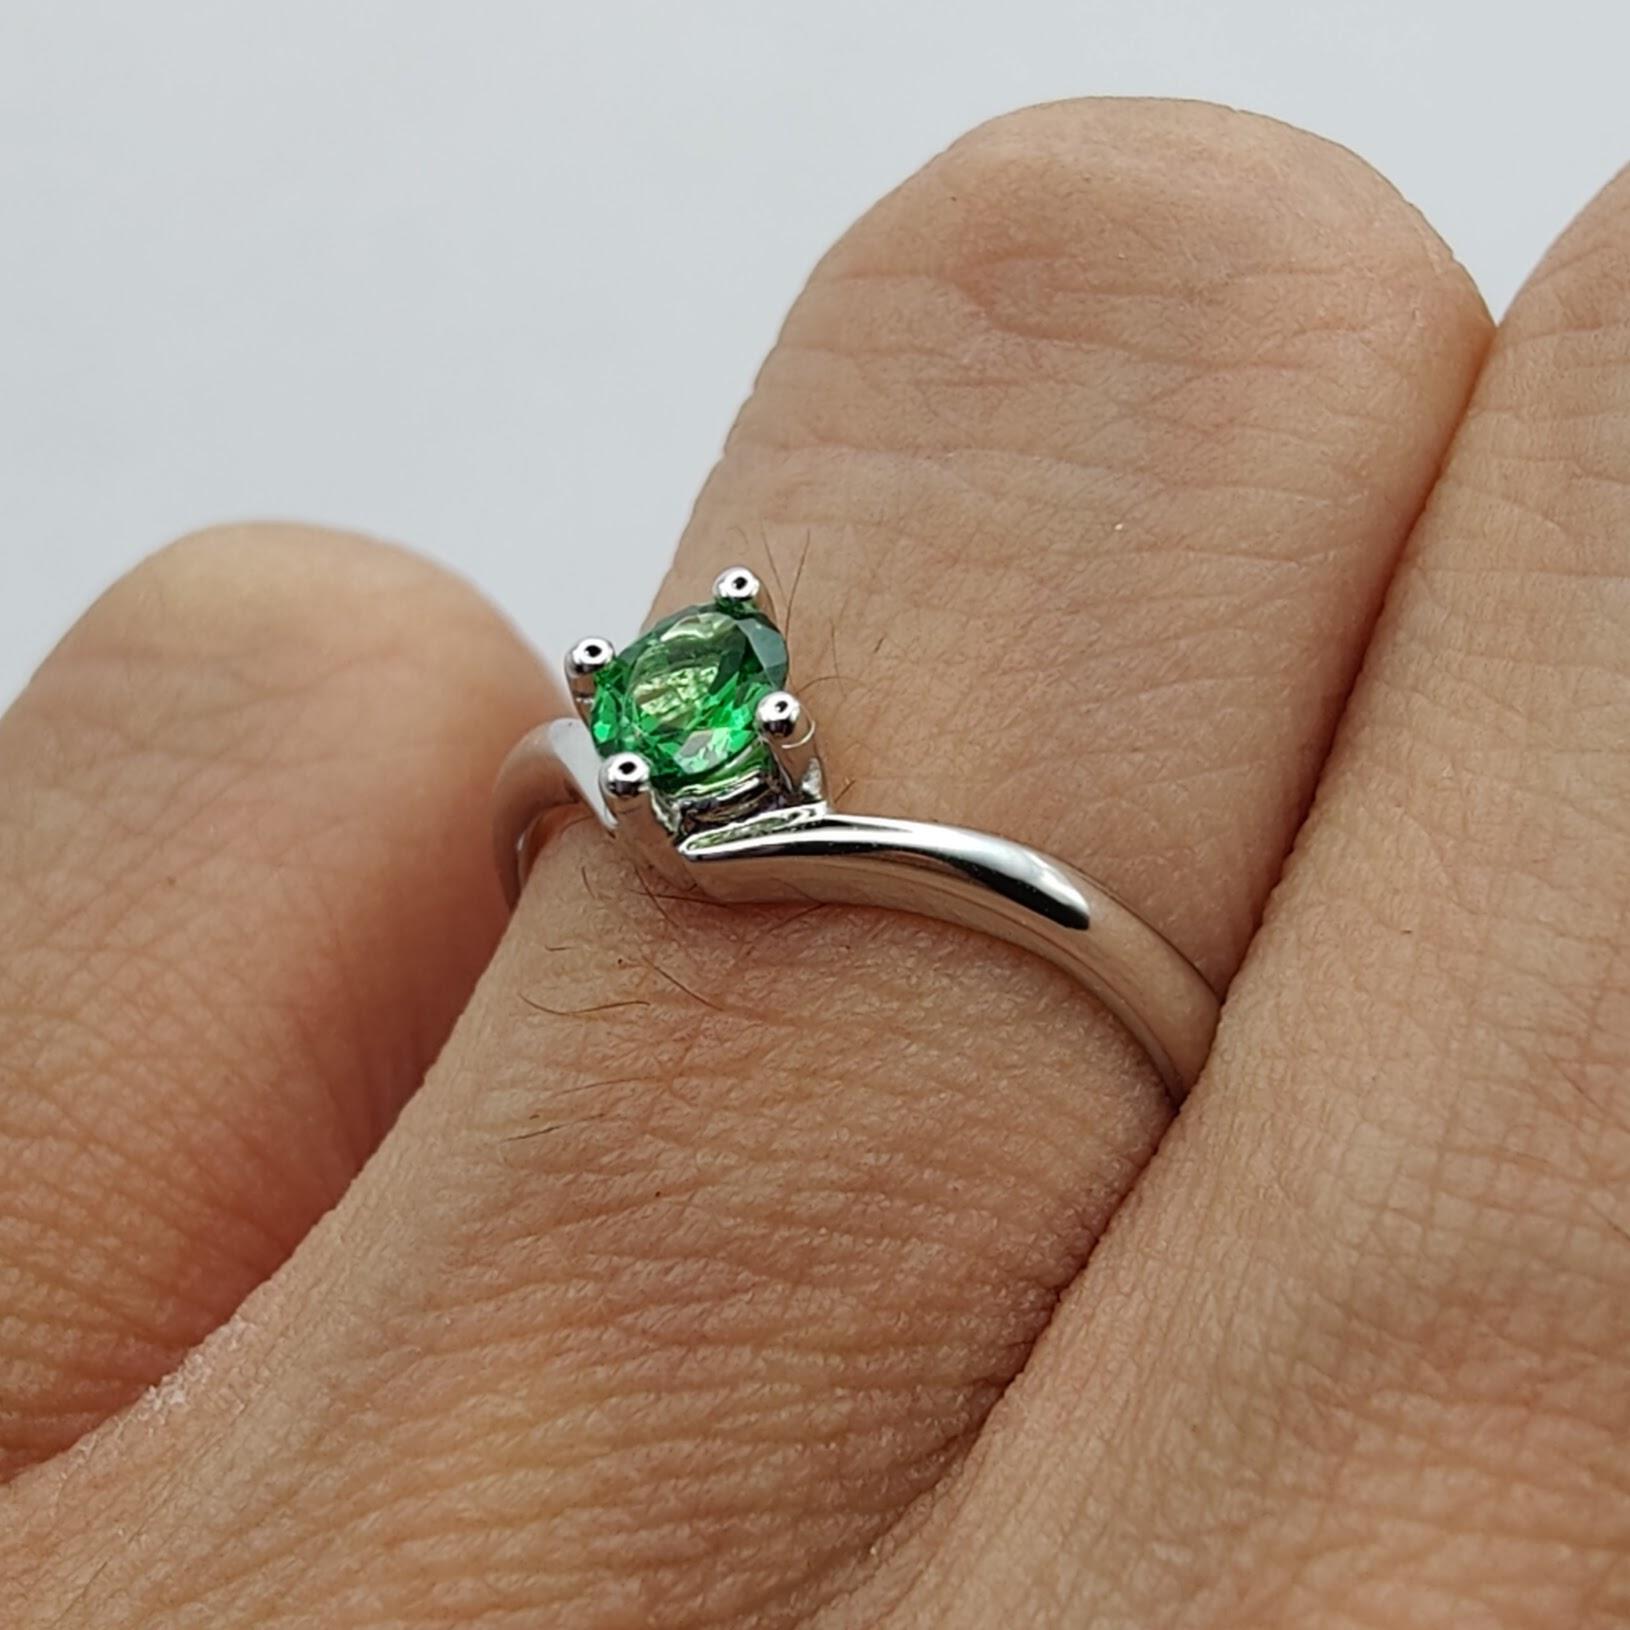 Oval Cut Emerald 4-Prong Solitaire Ring in 18k White Gold For Sale 14